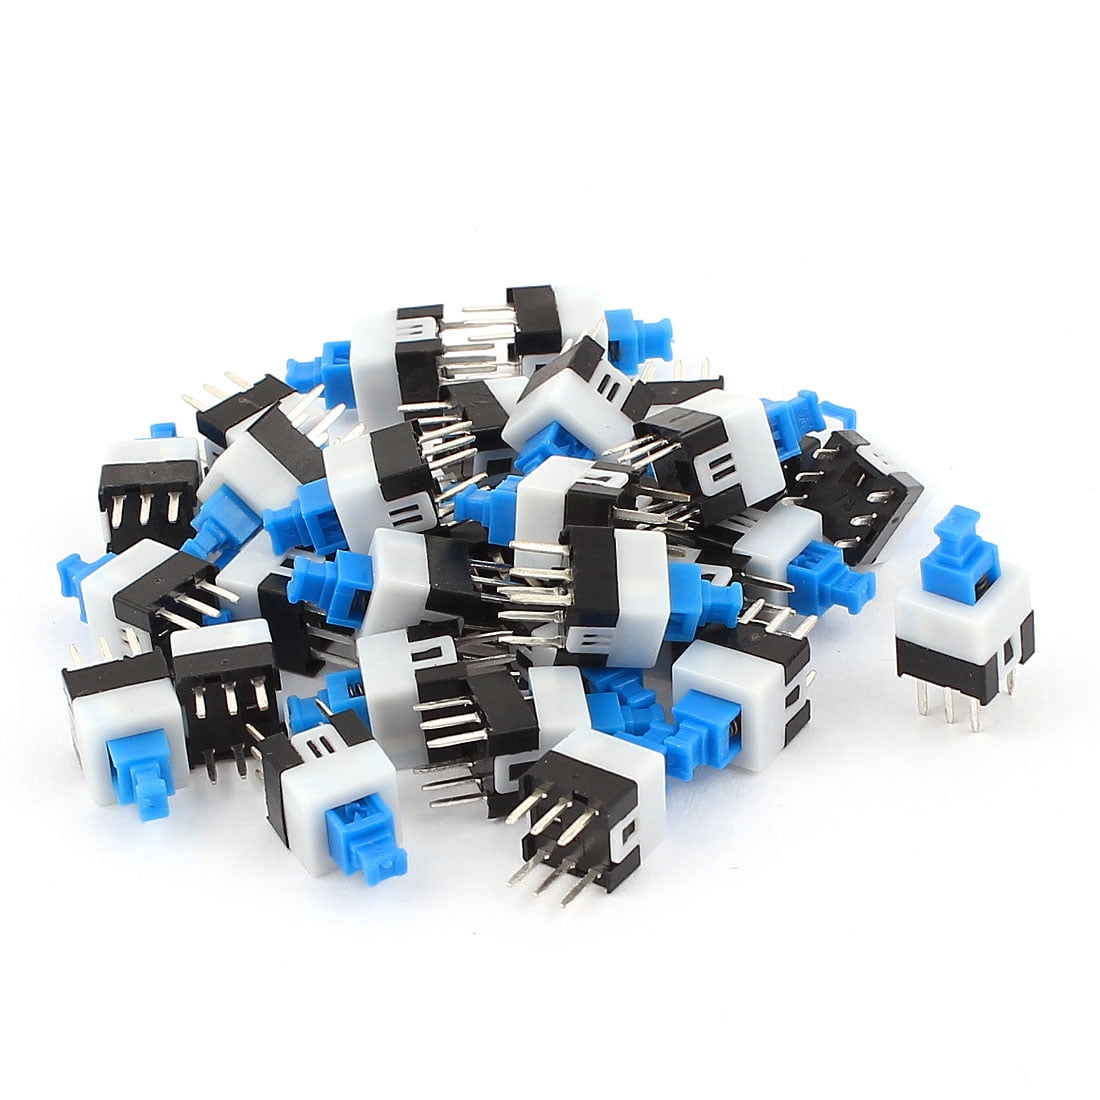 50PCS Push Button Self Latching Momentary Tactile Switch 7x7mm Blue Button 6-Pin 